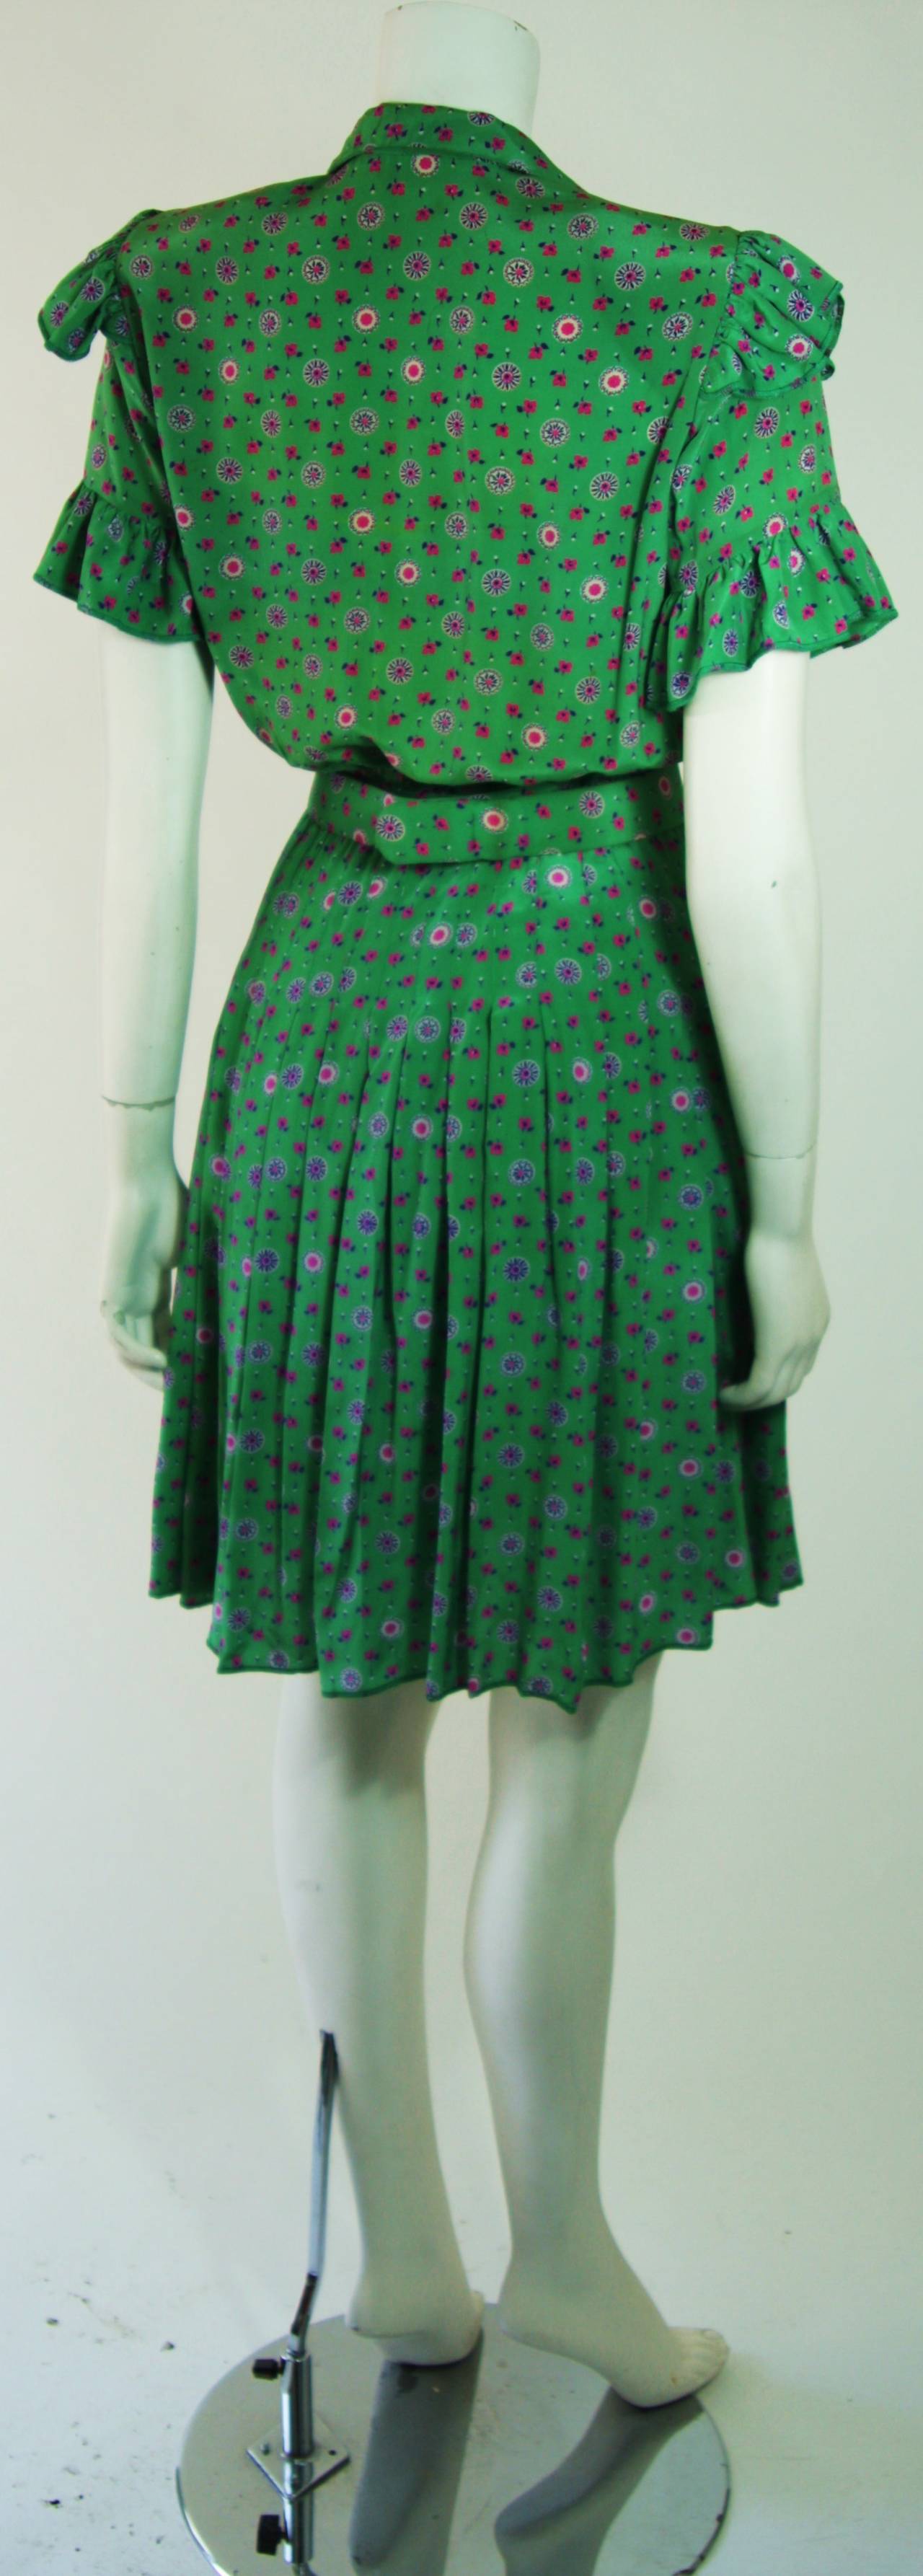 Nolan Miller Green Floral Silk Play Suit Ensemble with Skirt and Belt Size S 3